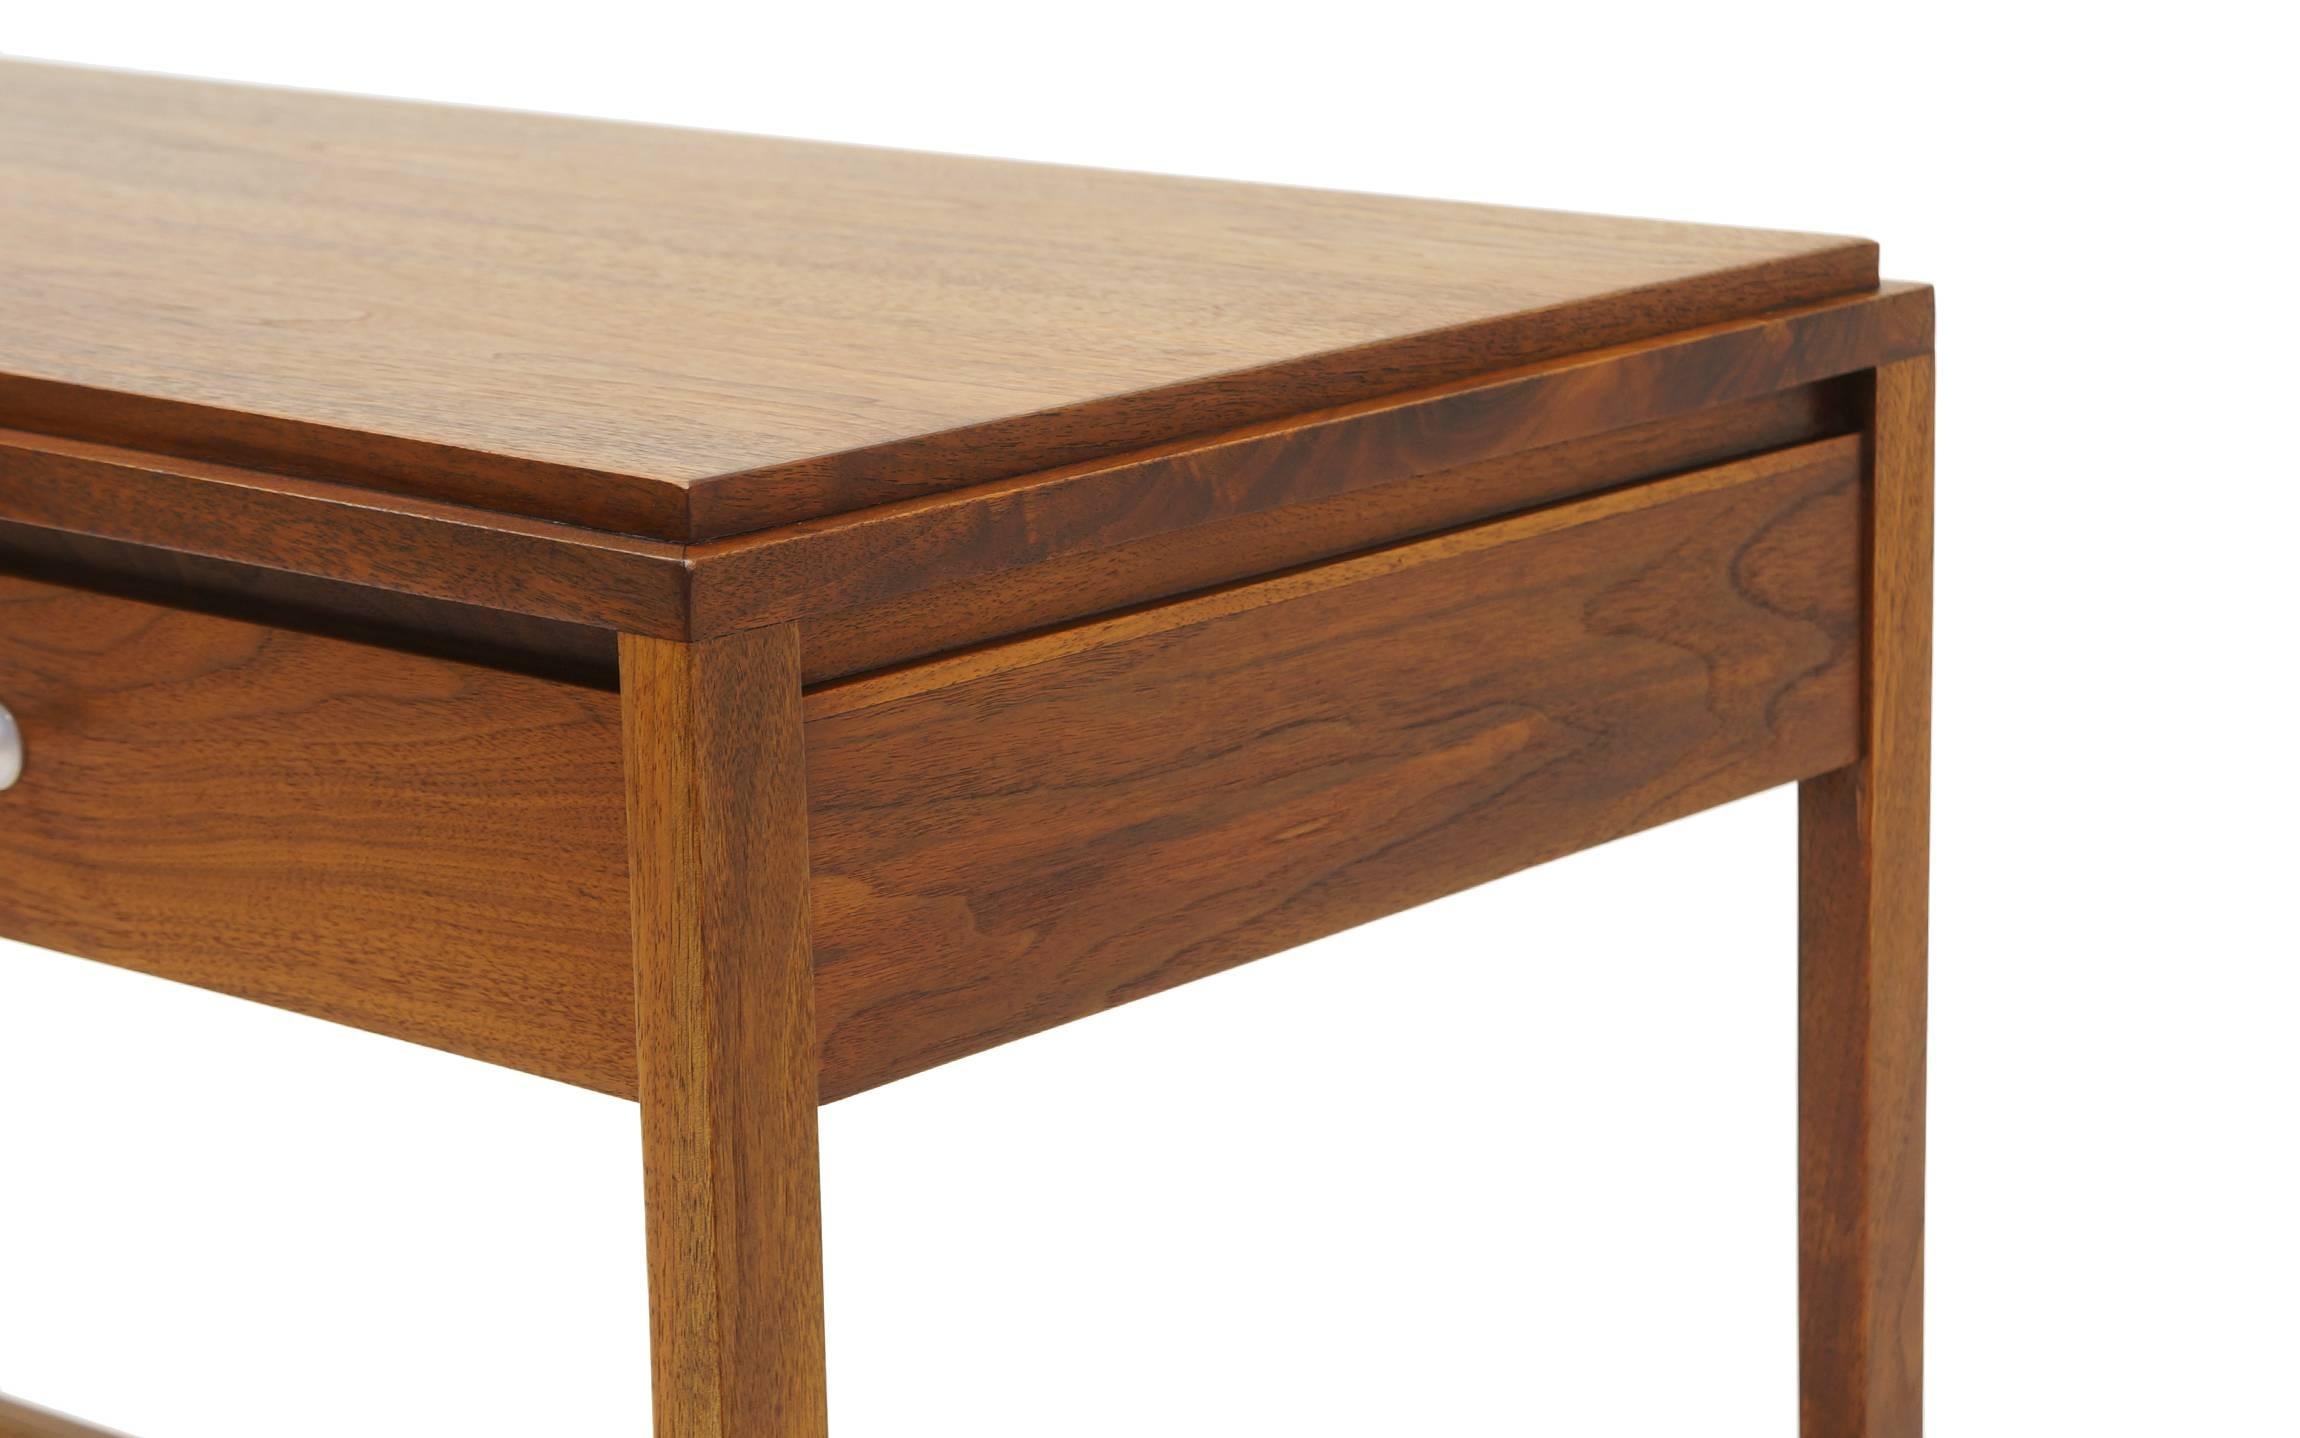 Mid-20th Century Console Server by Paul McCobb for the Grand Rapids Collection